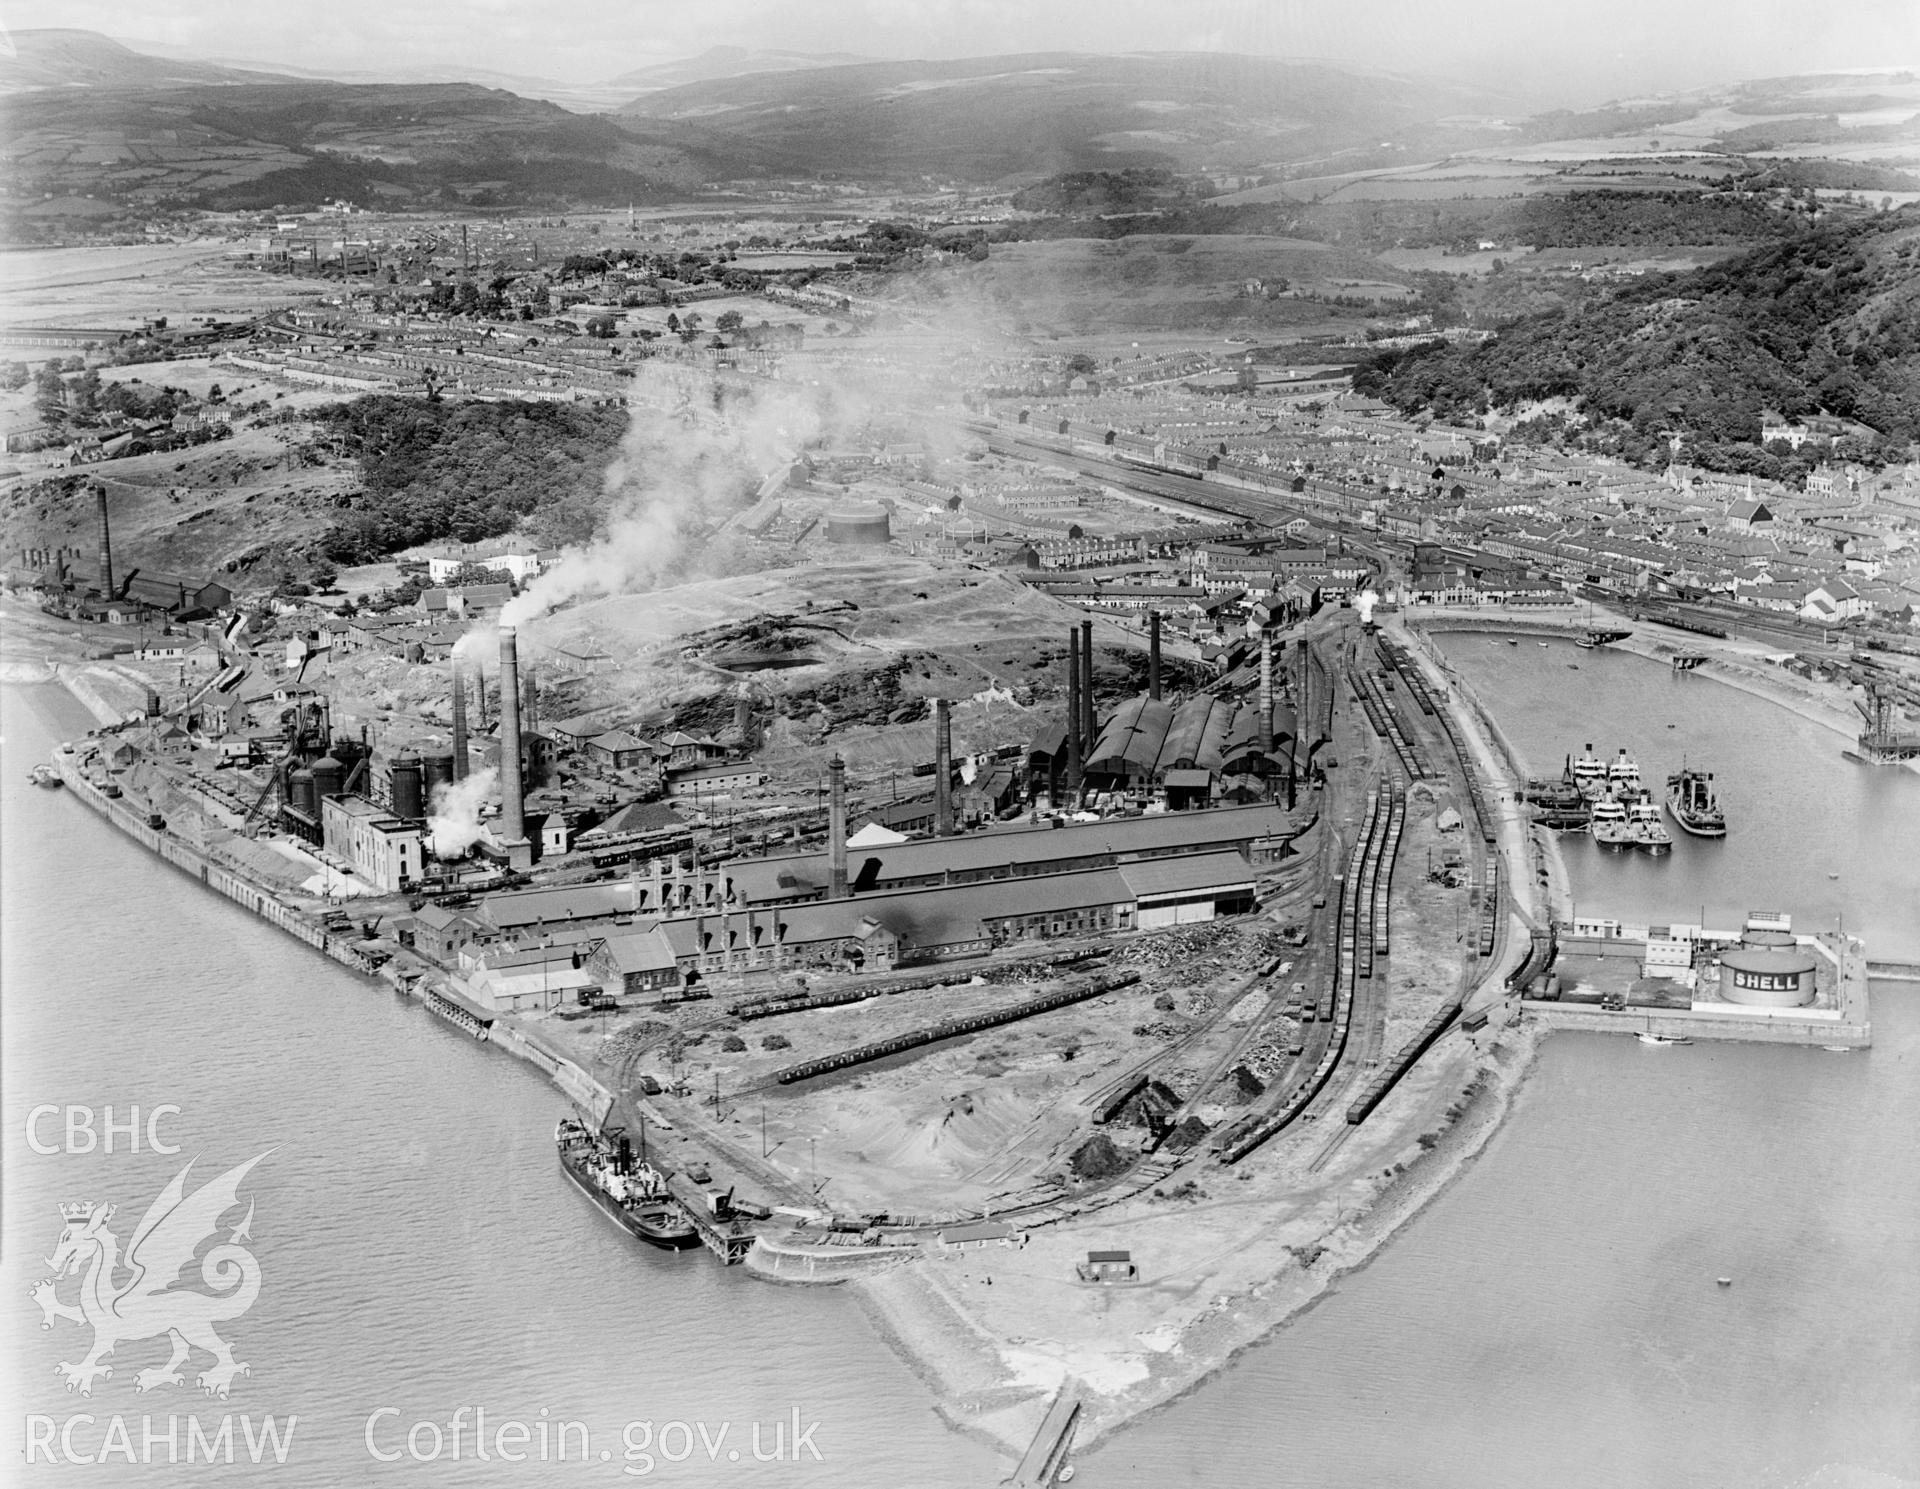 View of Neath River Navigation at Briton Ferry showing Briton Ferry dock, Cambria Cokeworks, Gwalia and Victoria tinplate works and Britain Ferry steelworks, from the northeast, oblique aerial view. 5?x4? black and white glass plate negative.